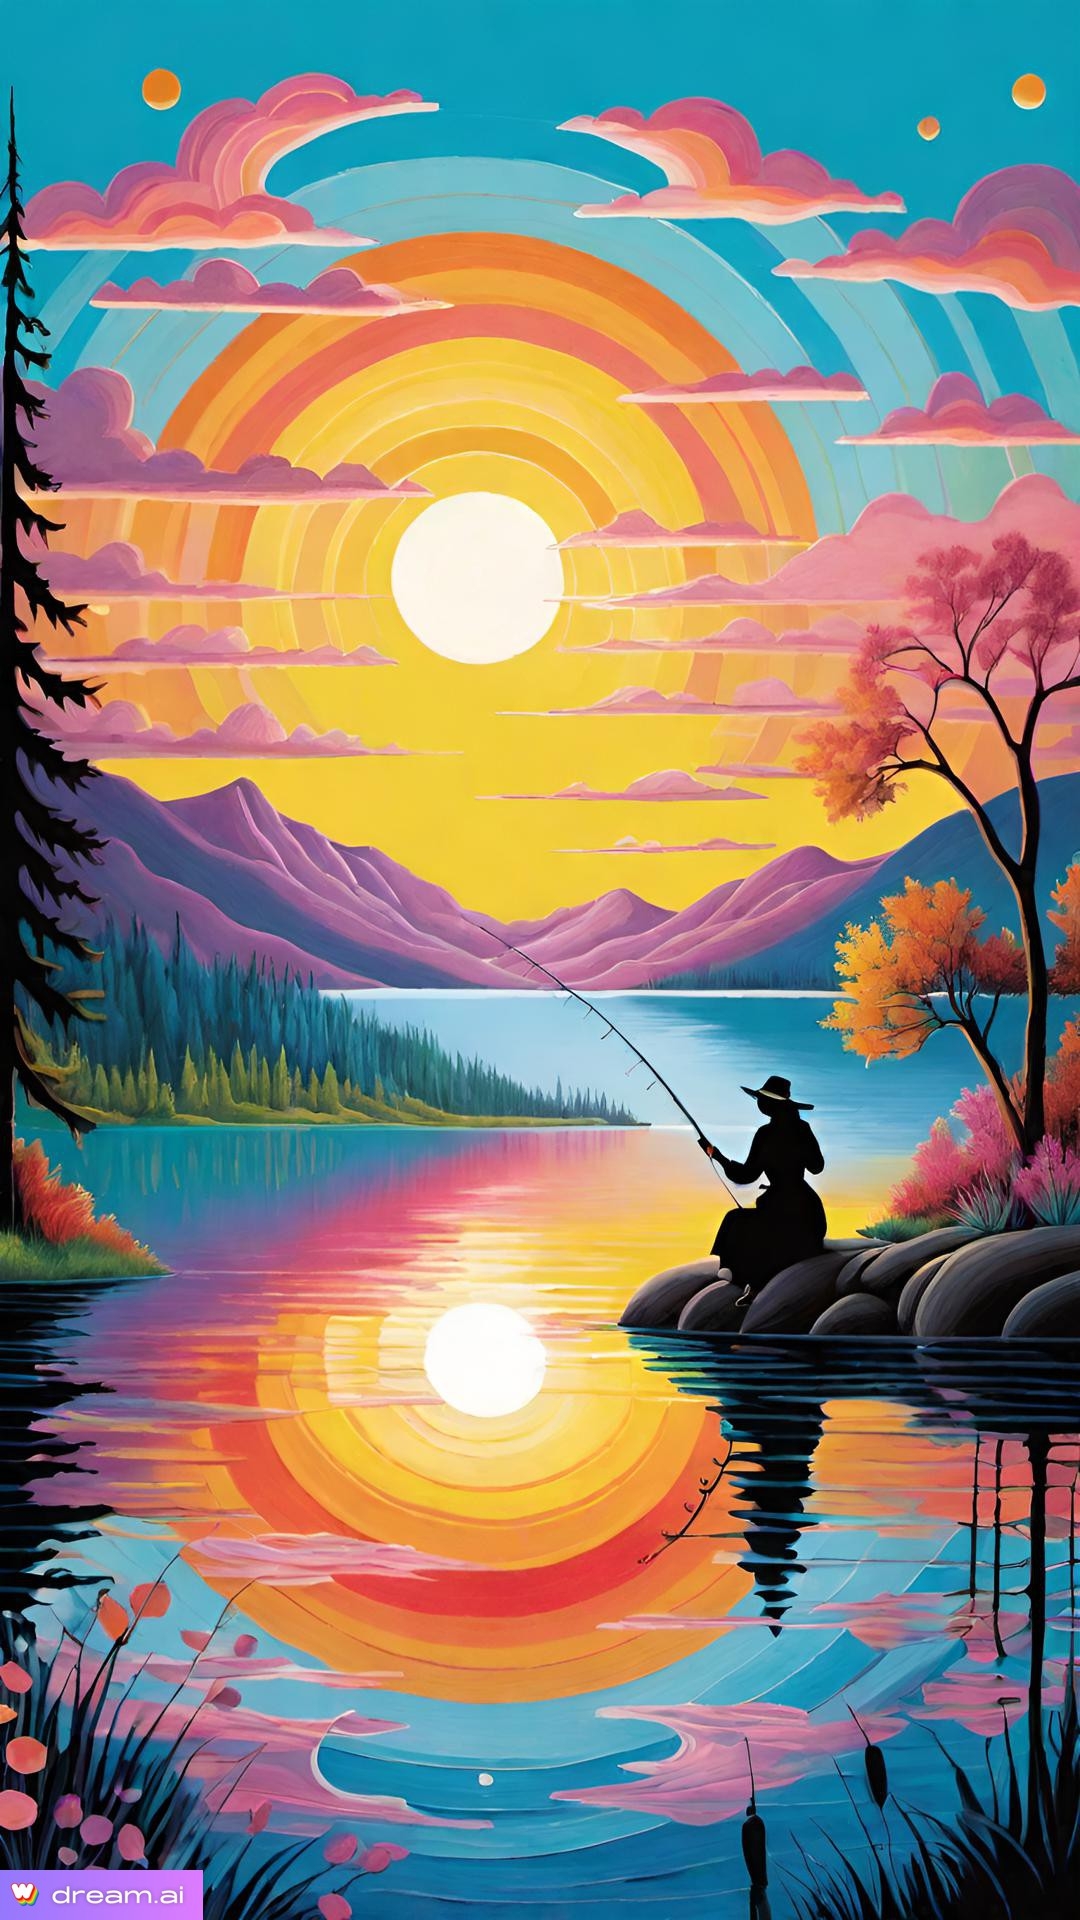 a painting of a man fishing on a lake